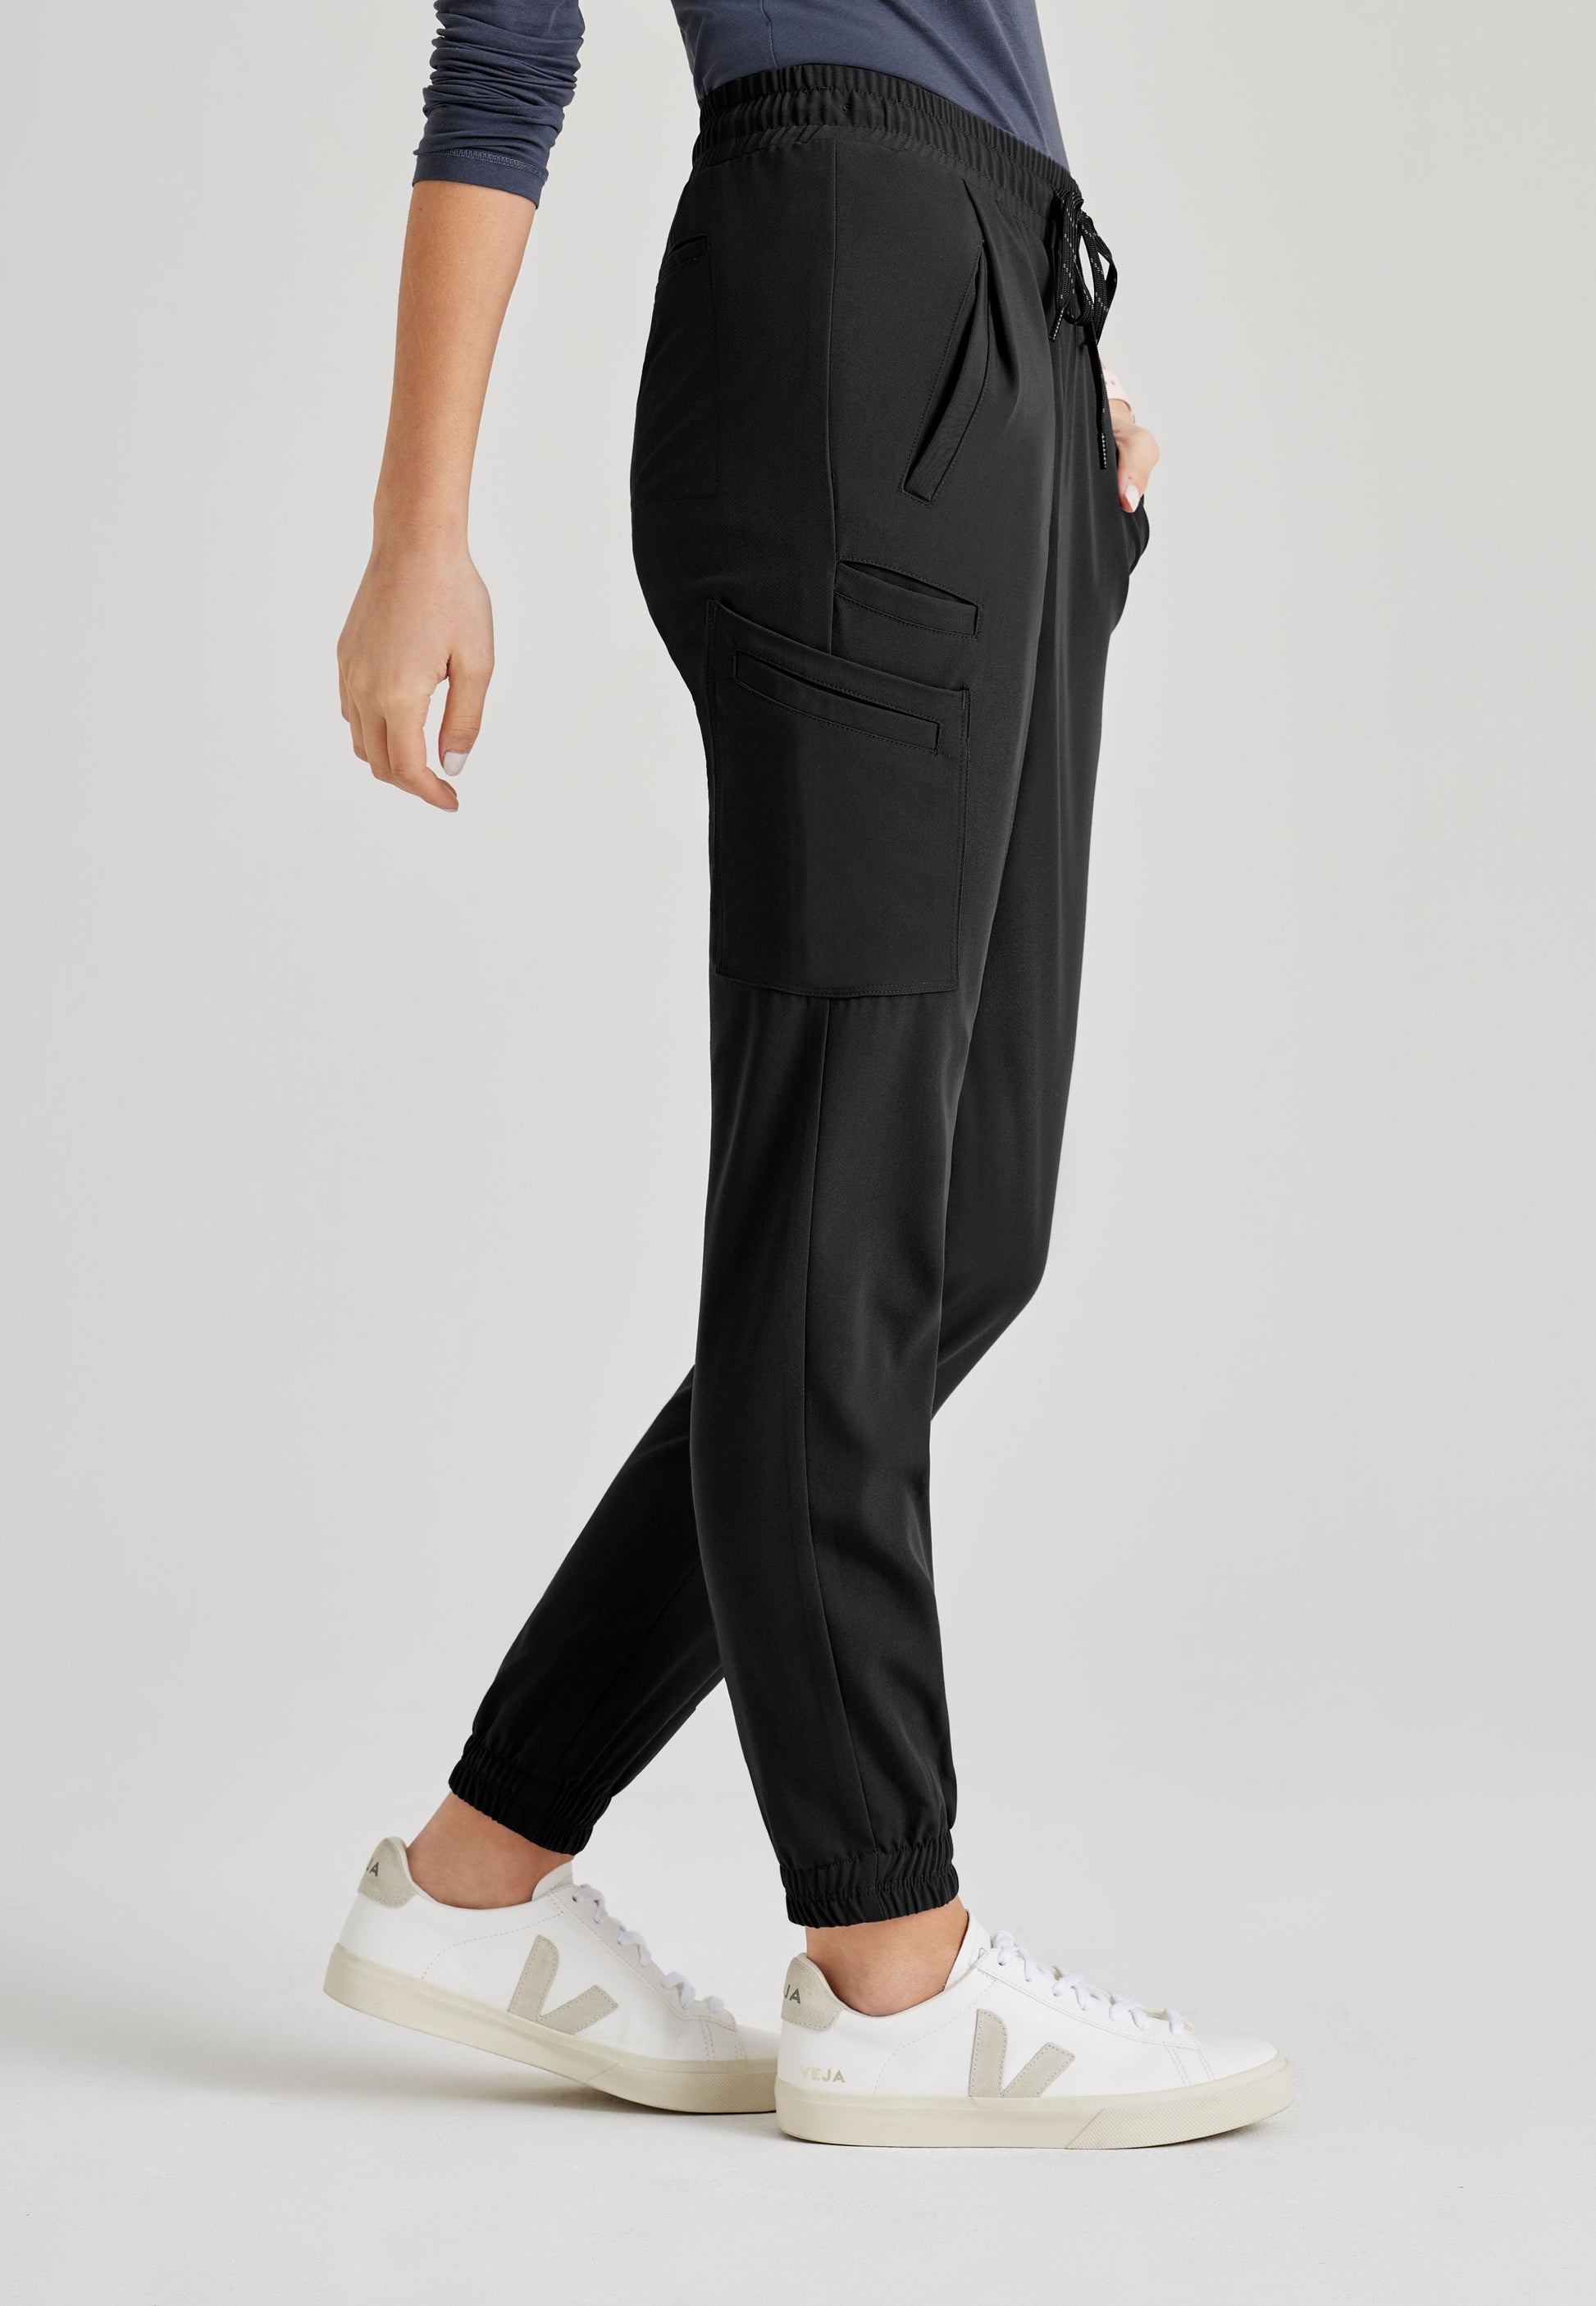 Barco Unify BUP606 Mission Women's Jogger Pant Side